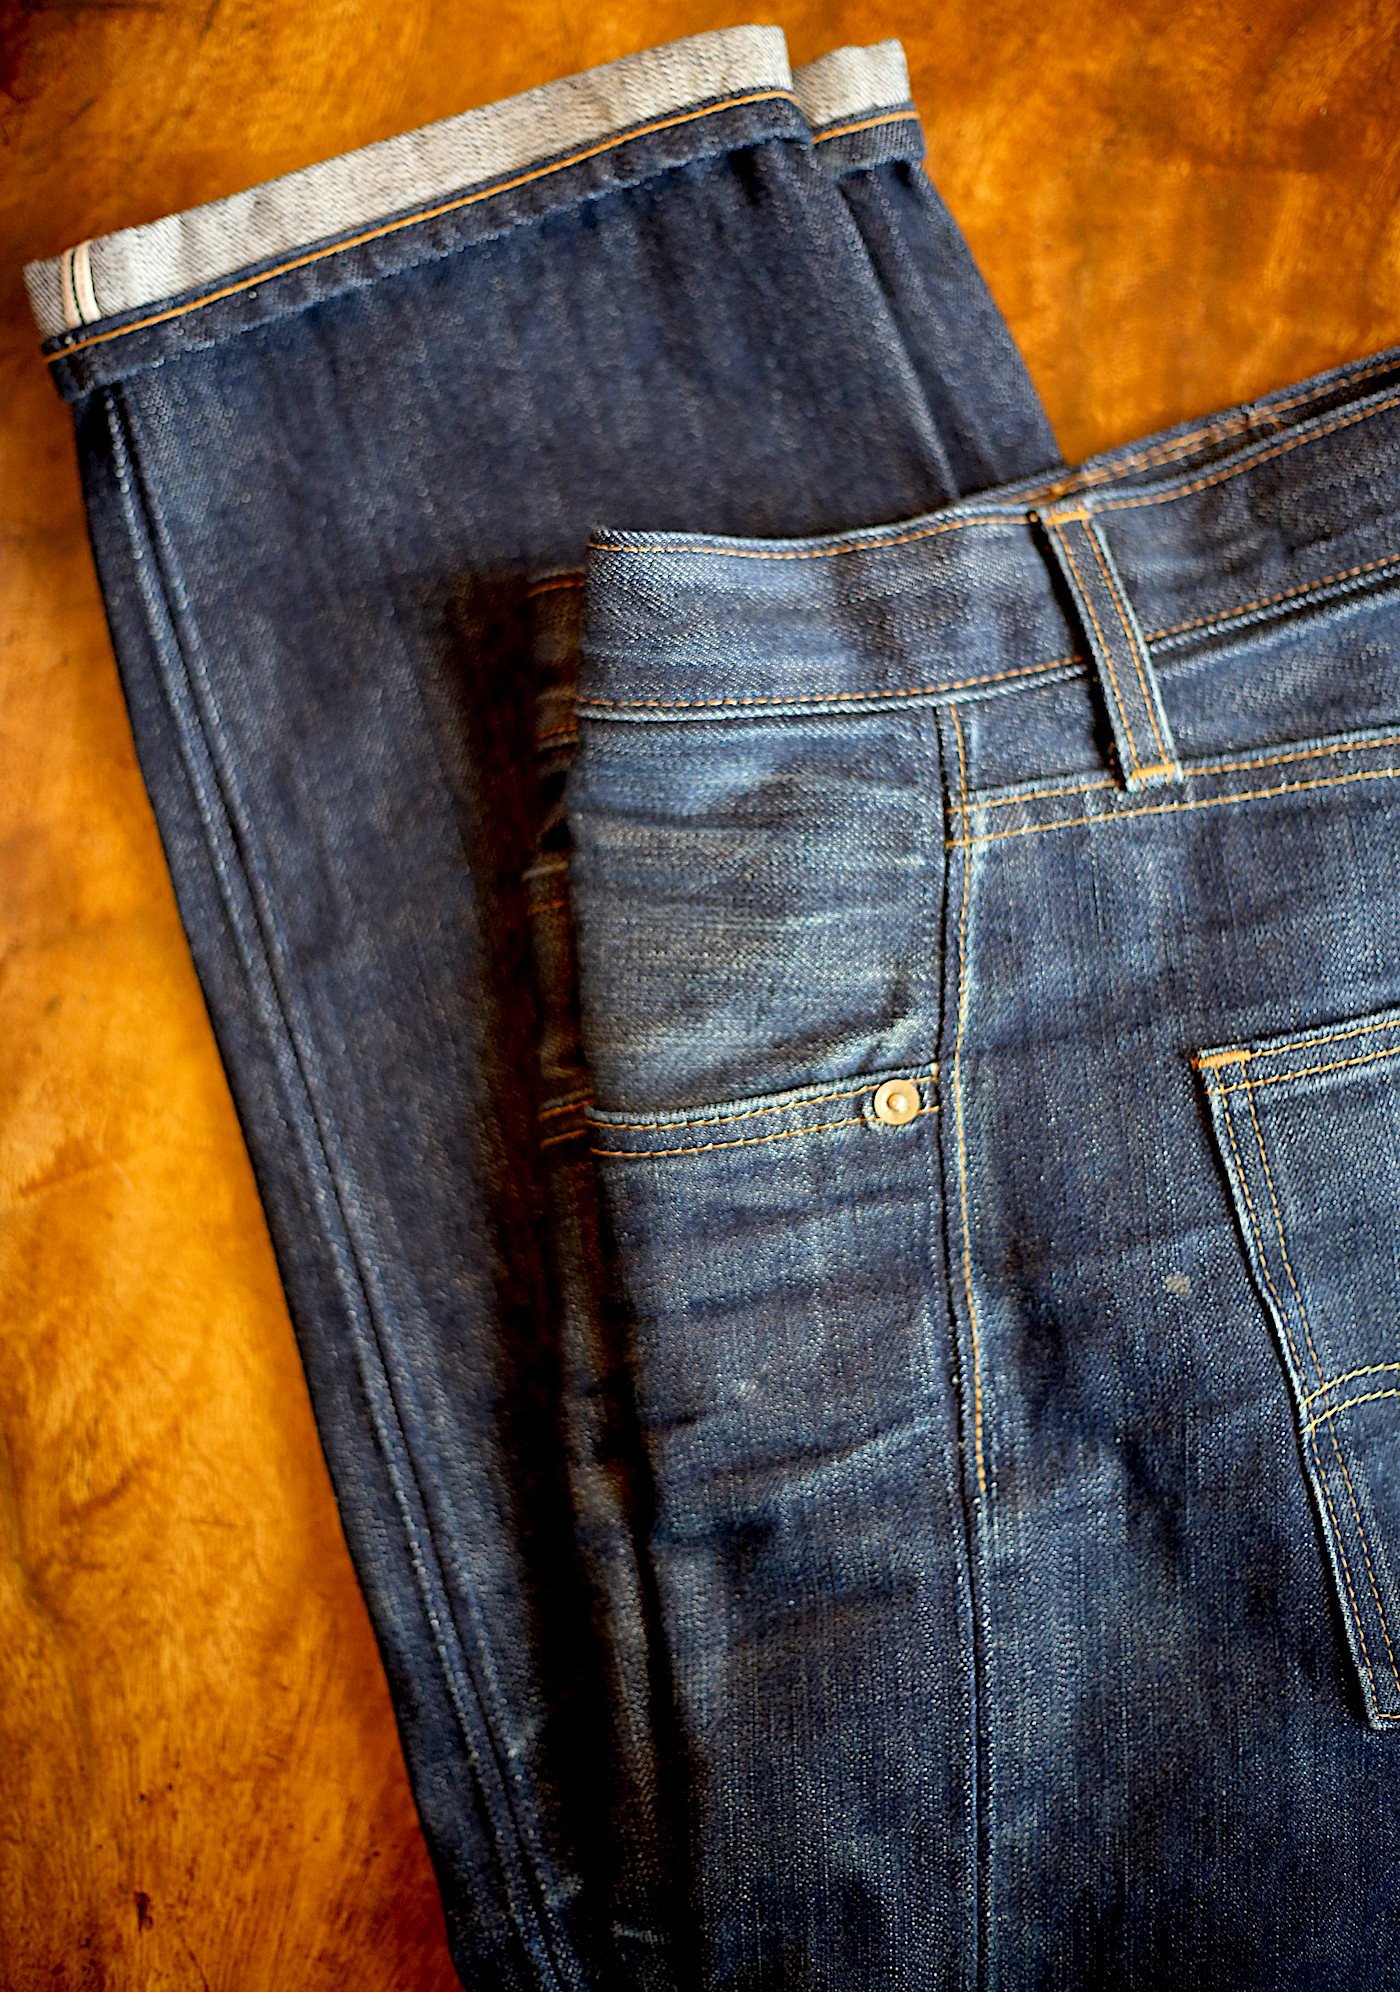 How jeans can be altered – Permanent Style